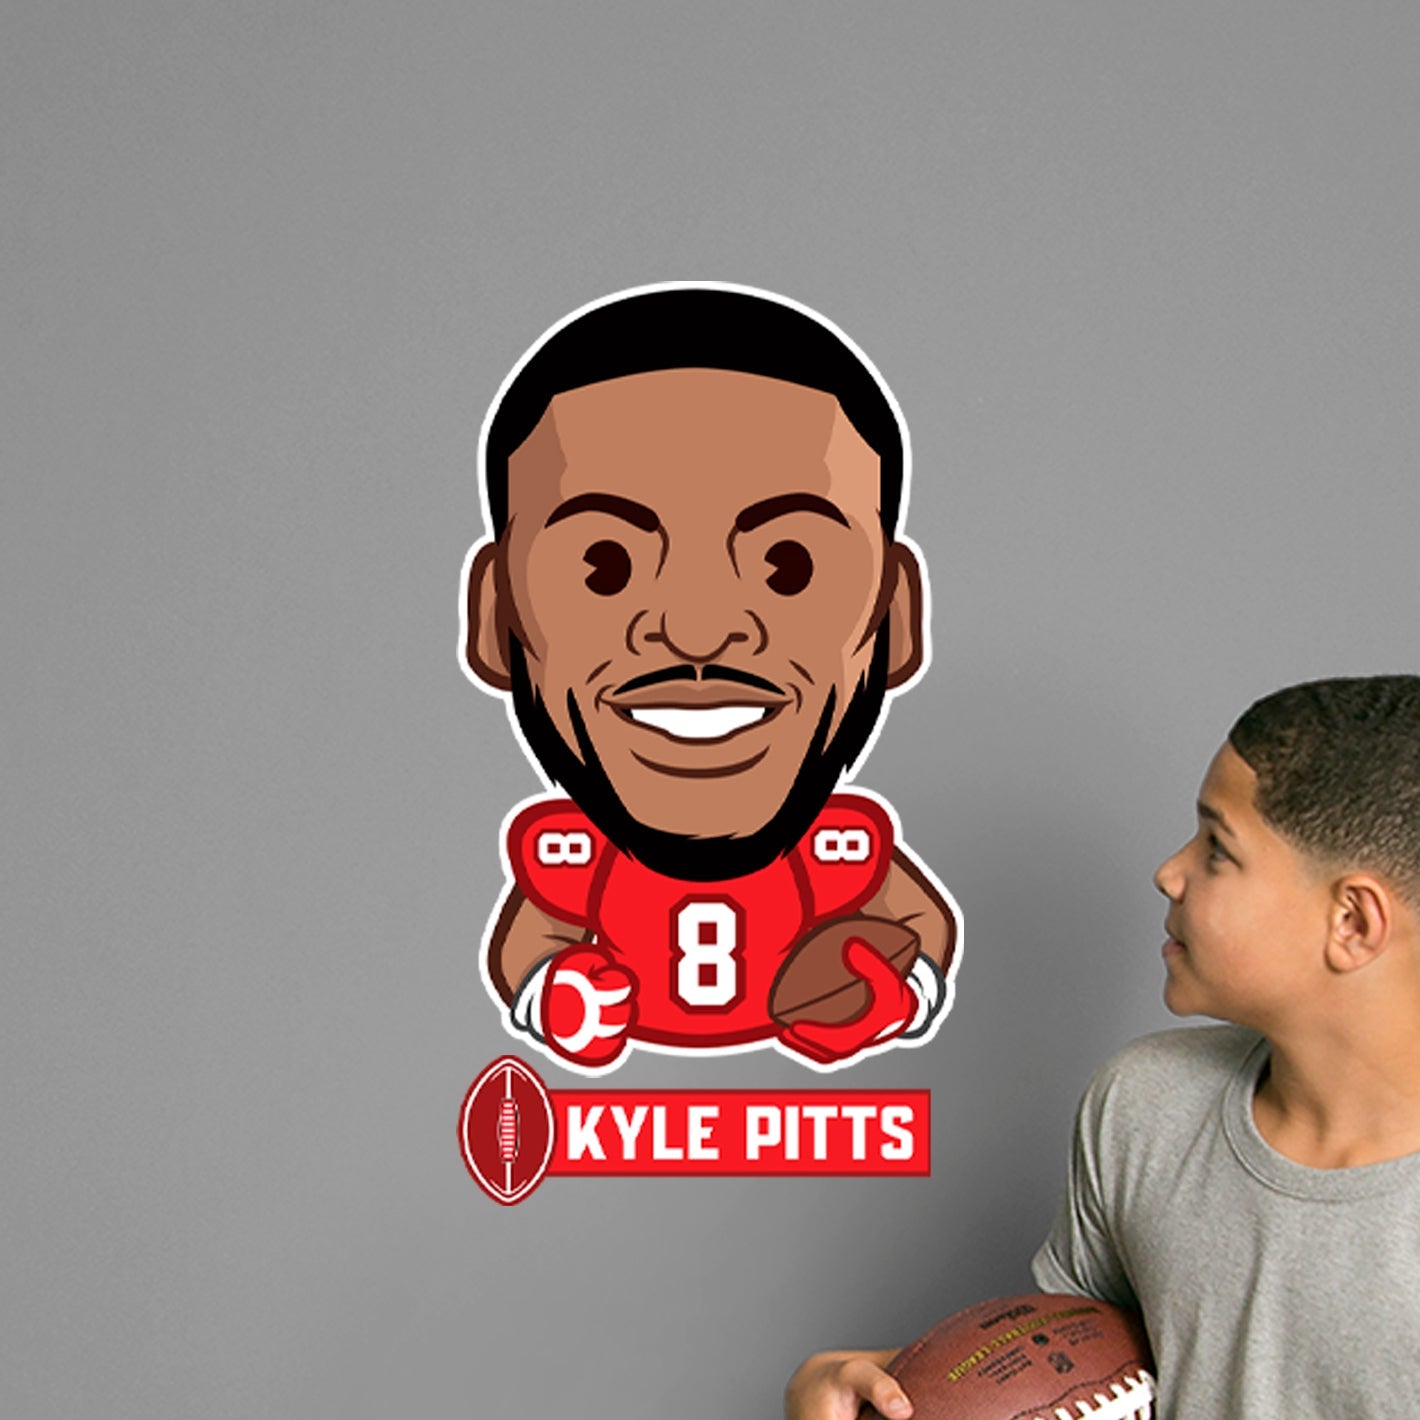 Atlanta Falcons: Kyle Pitts Emoji - Officially Licensed NFLPA Removable Adhesive Decal